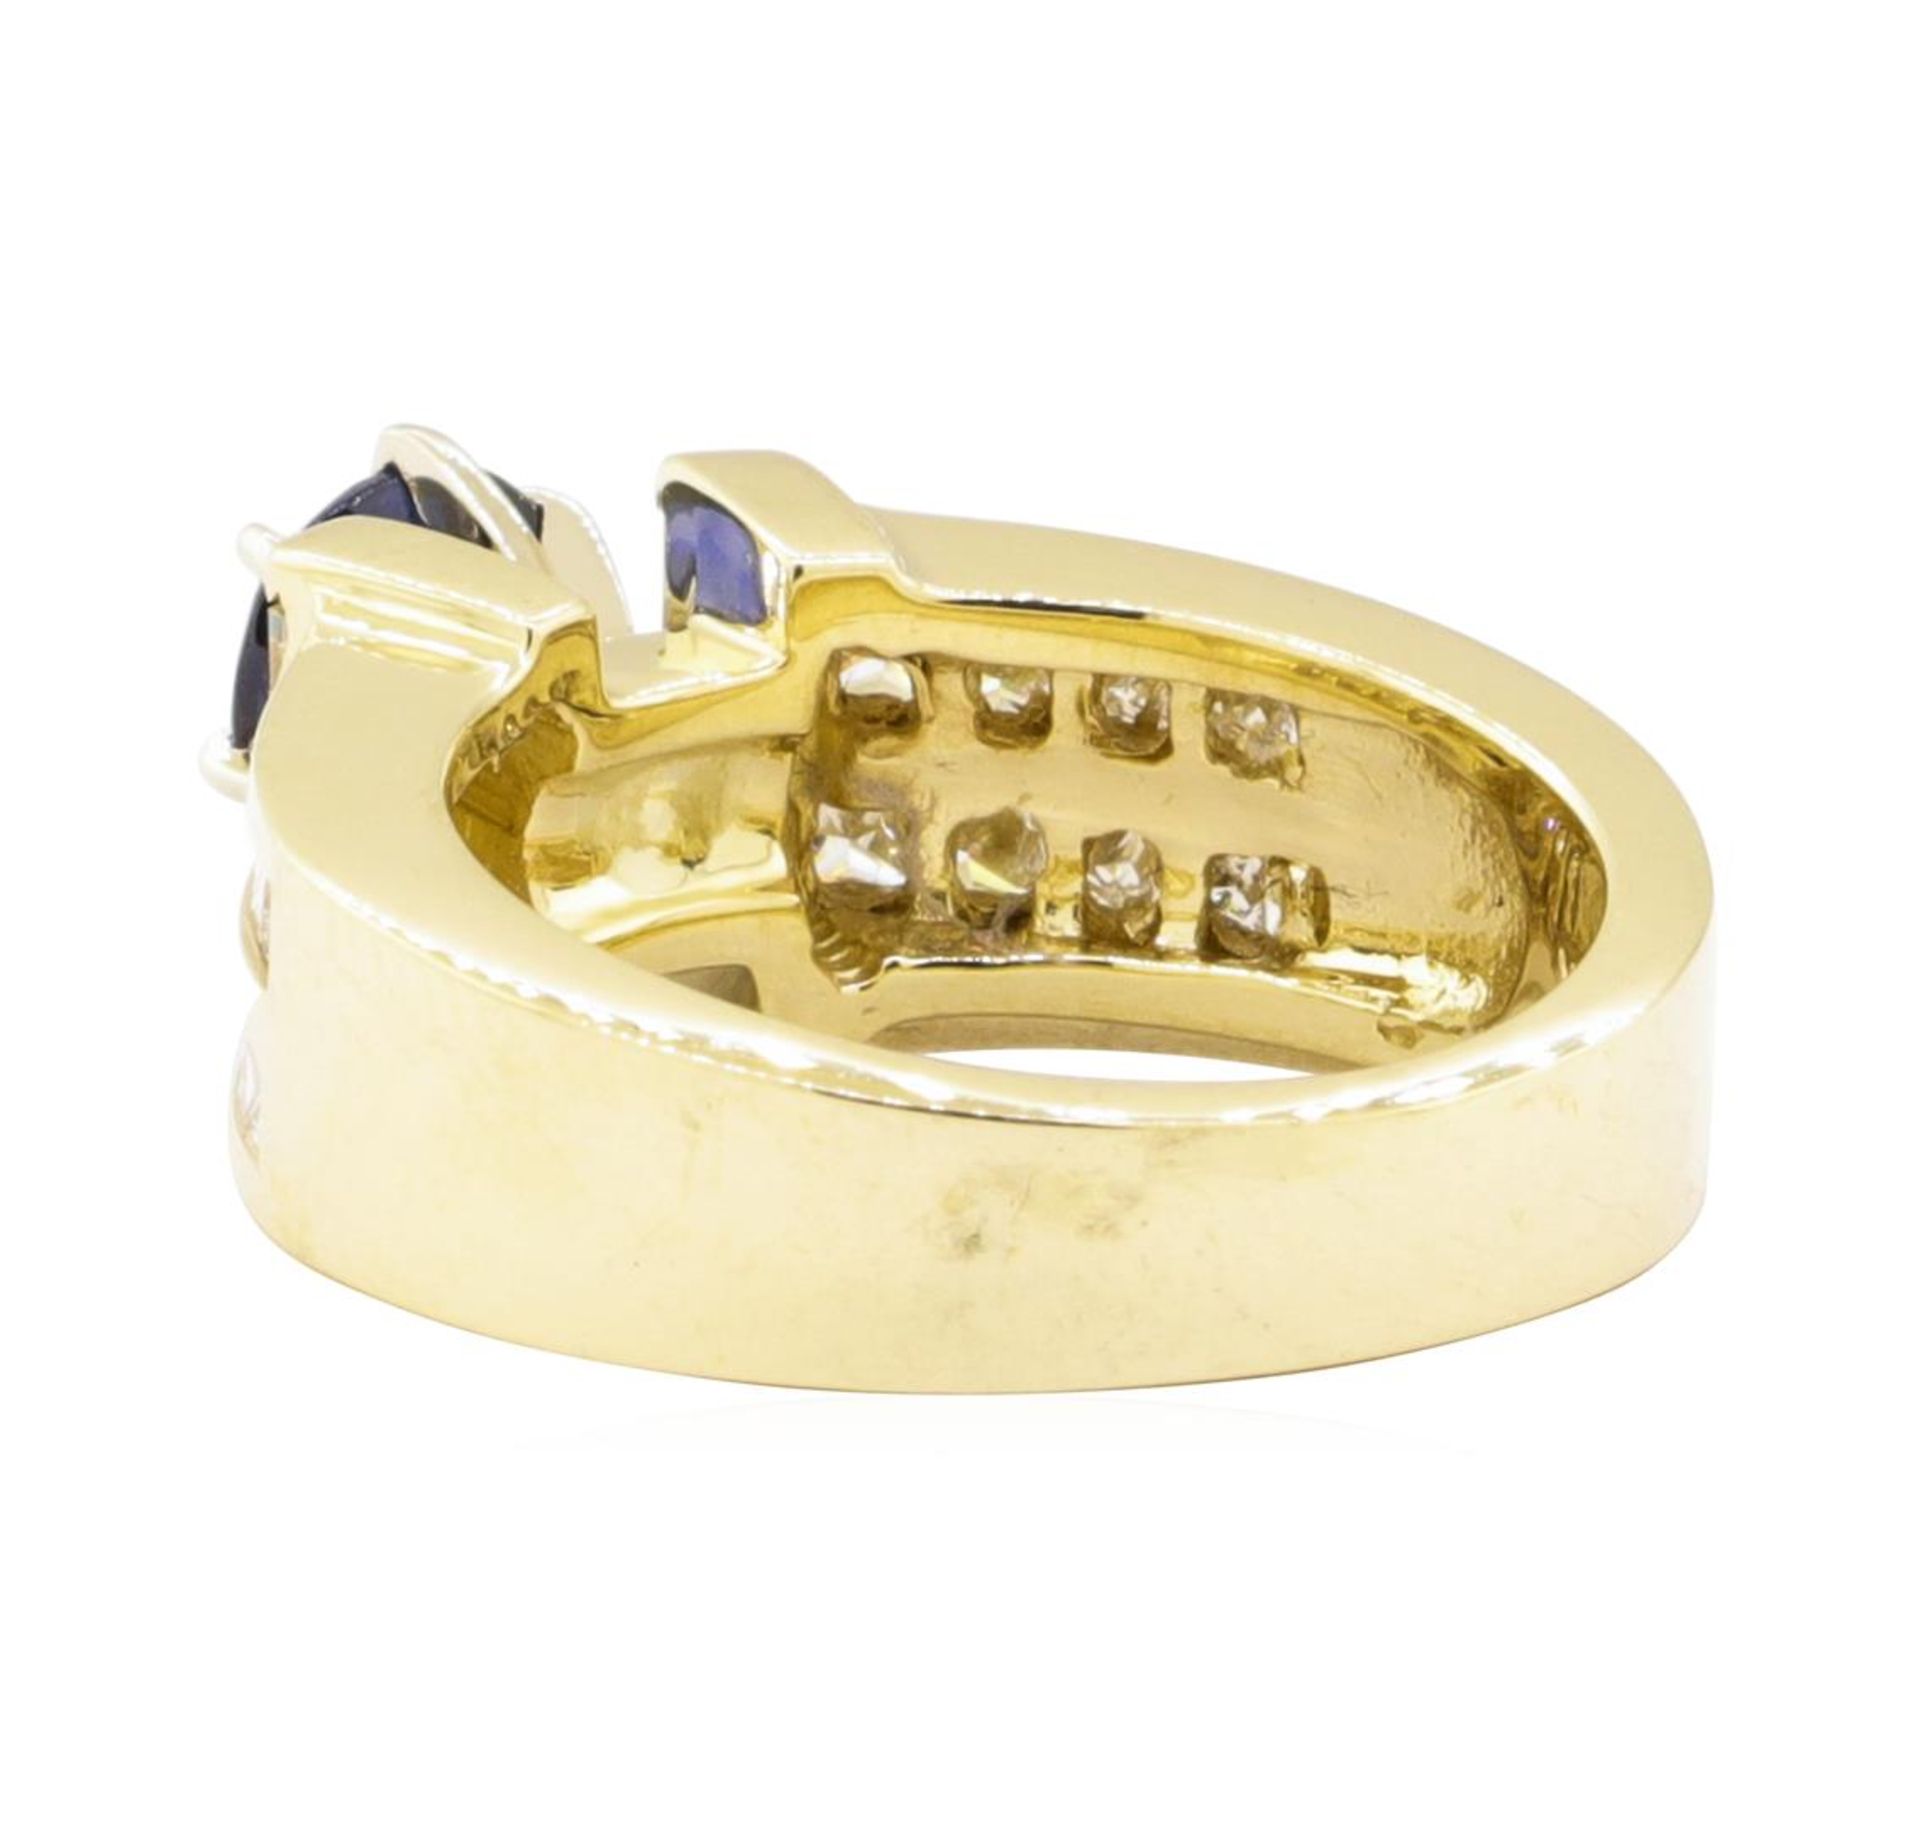 2.05 ctw Blue Sapphire And Diamond Ring - 14KT Yellow Gold - Image 3 of 5